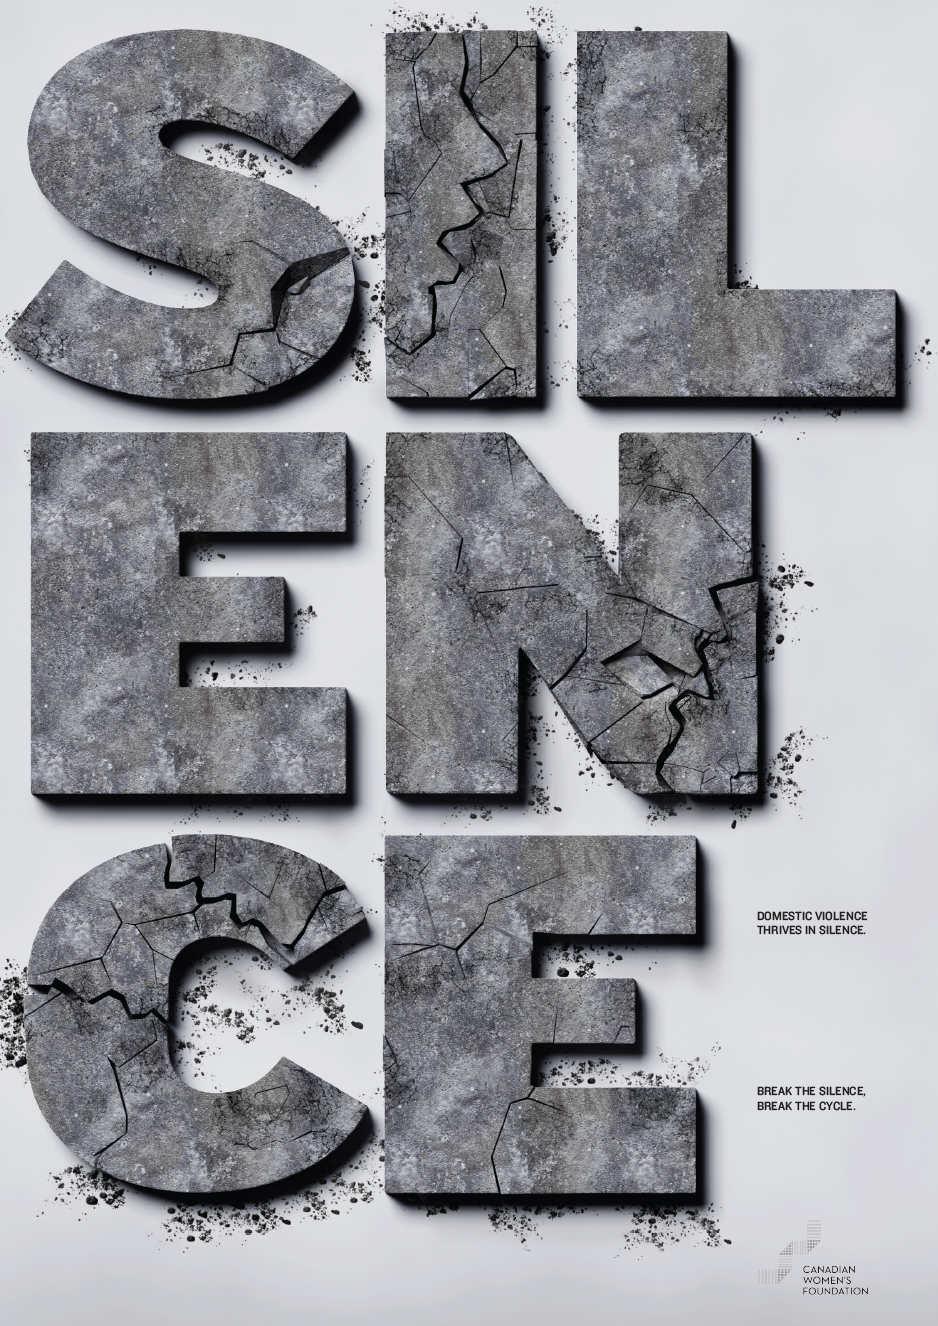 A poster depicting the word "Silence" rendered in cracked concrete to raise awareness about the importance of breaking the silence when it comes to domestic abuse.